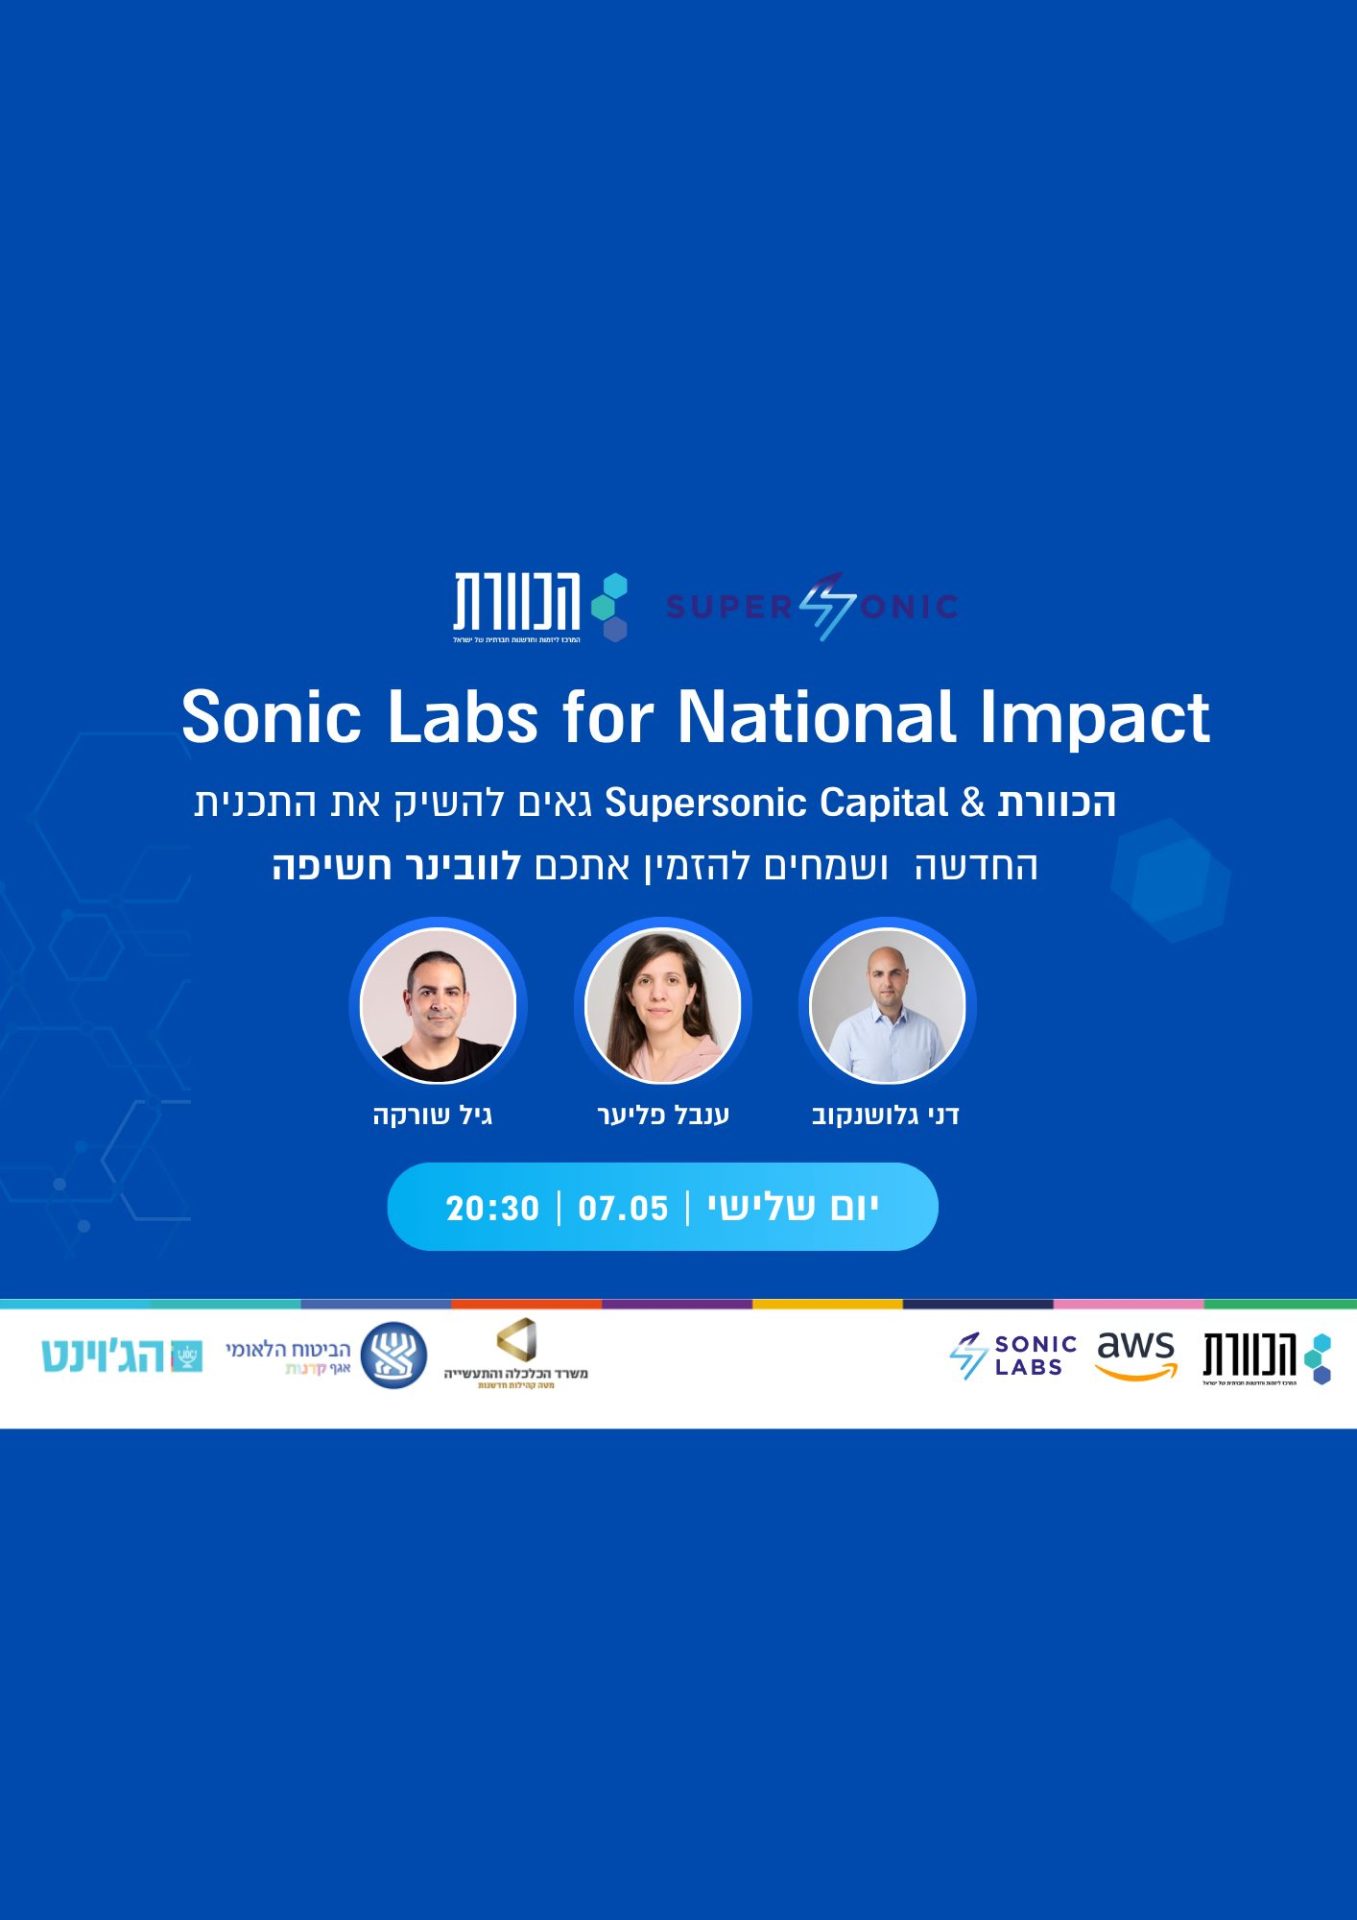 Sonic Labs for National Impact